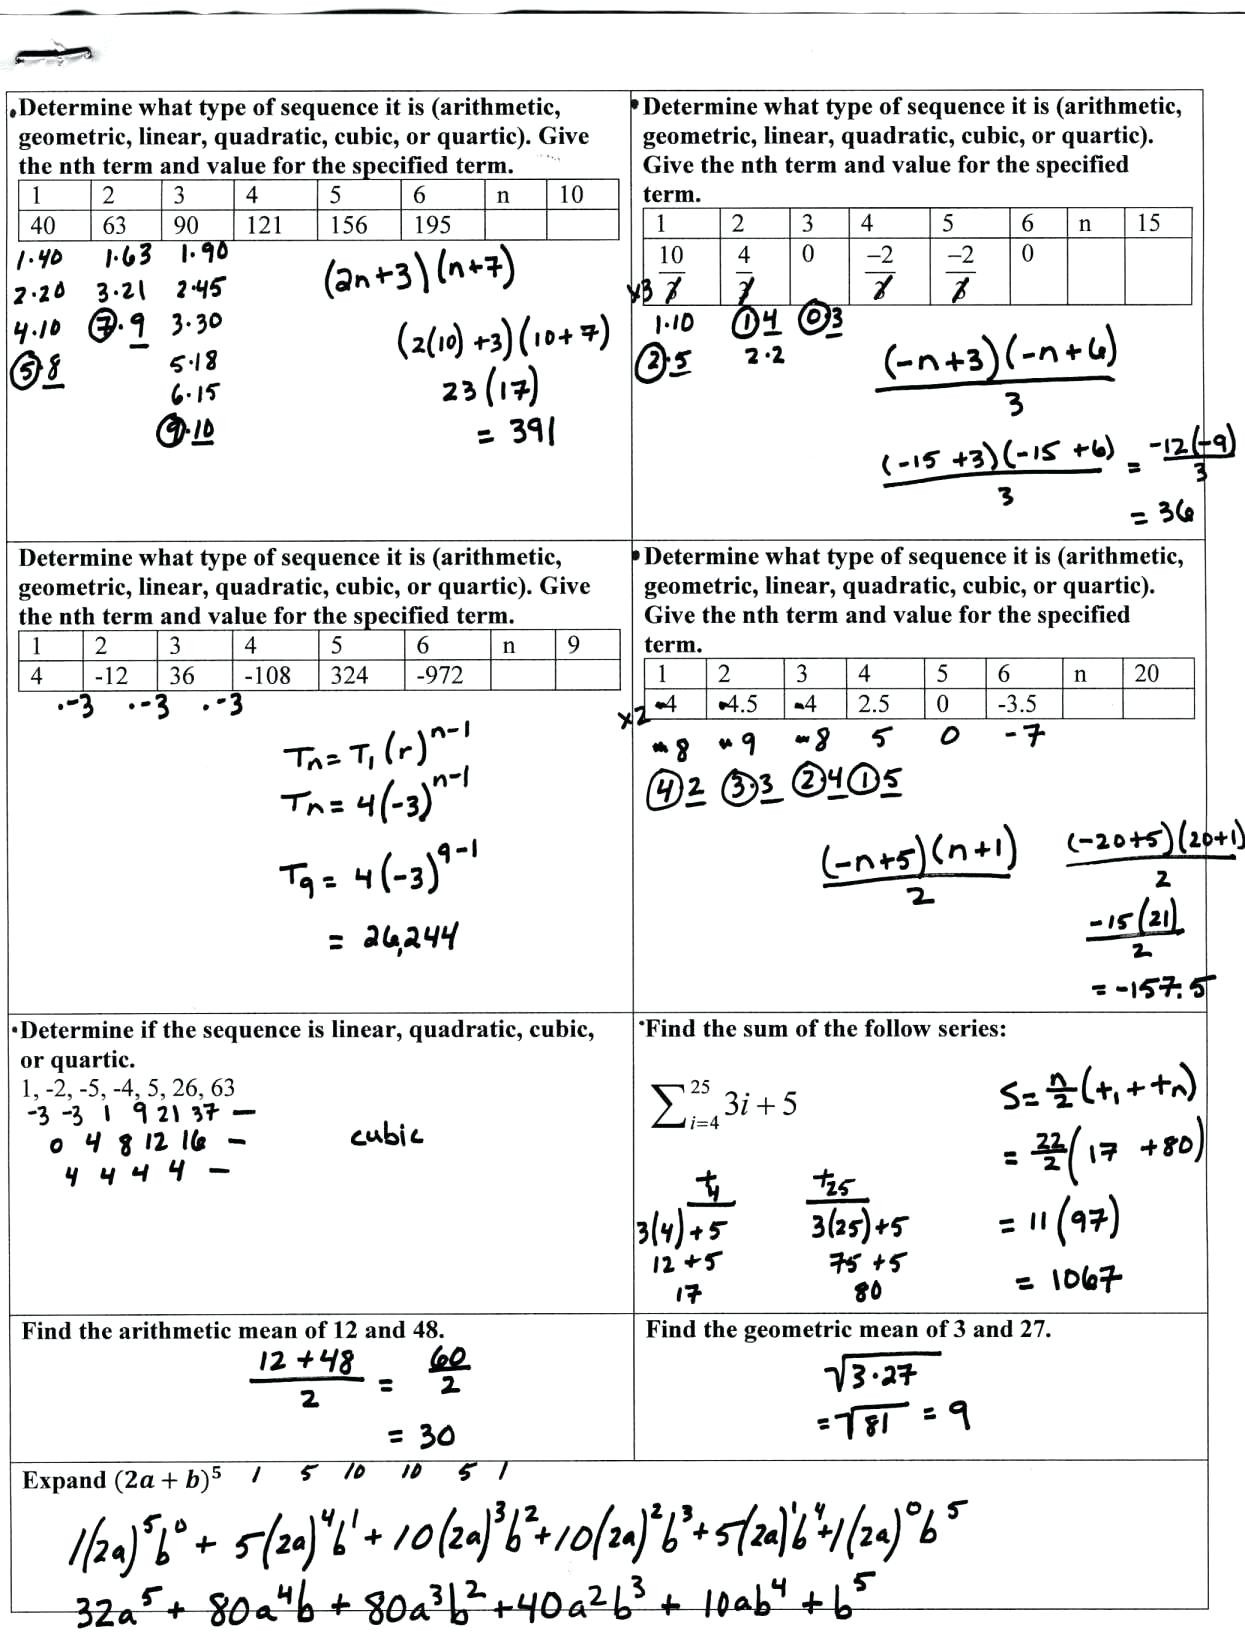 Geometric and Arithmetic Sequence Worksheet Arithmetic Sequence Series Worksheet Answers Worksheet List